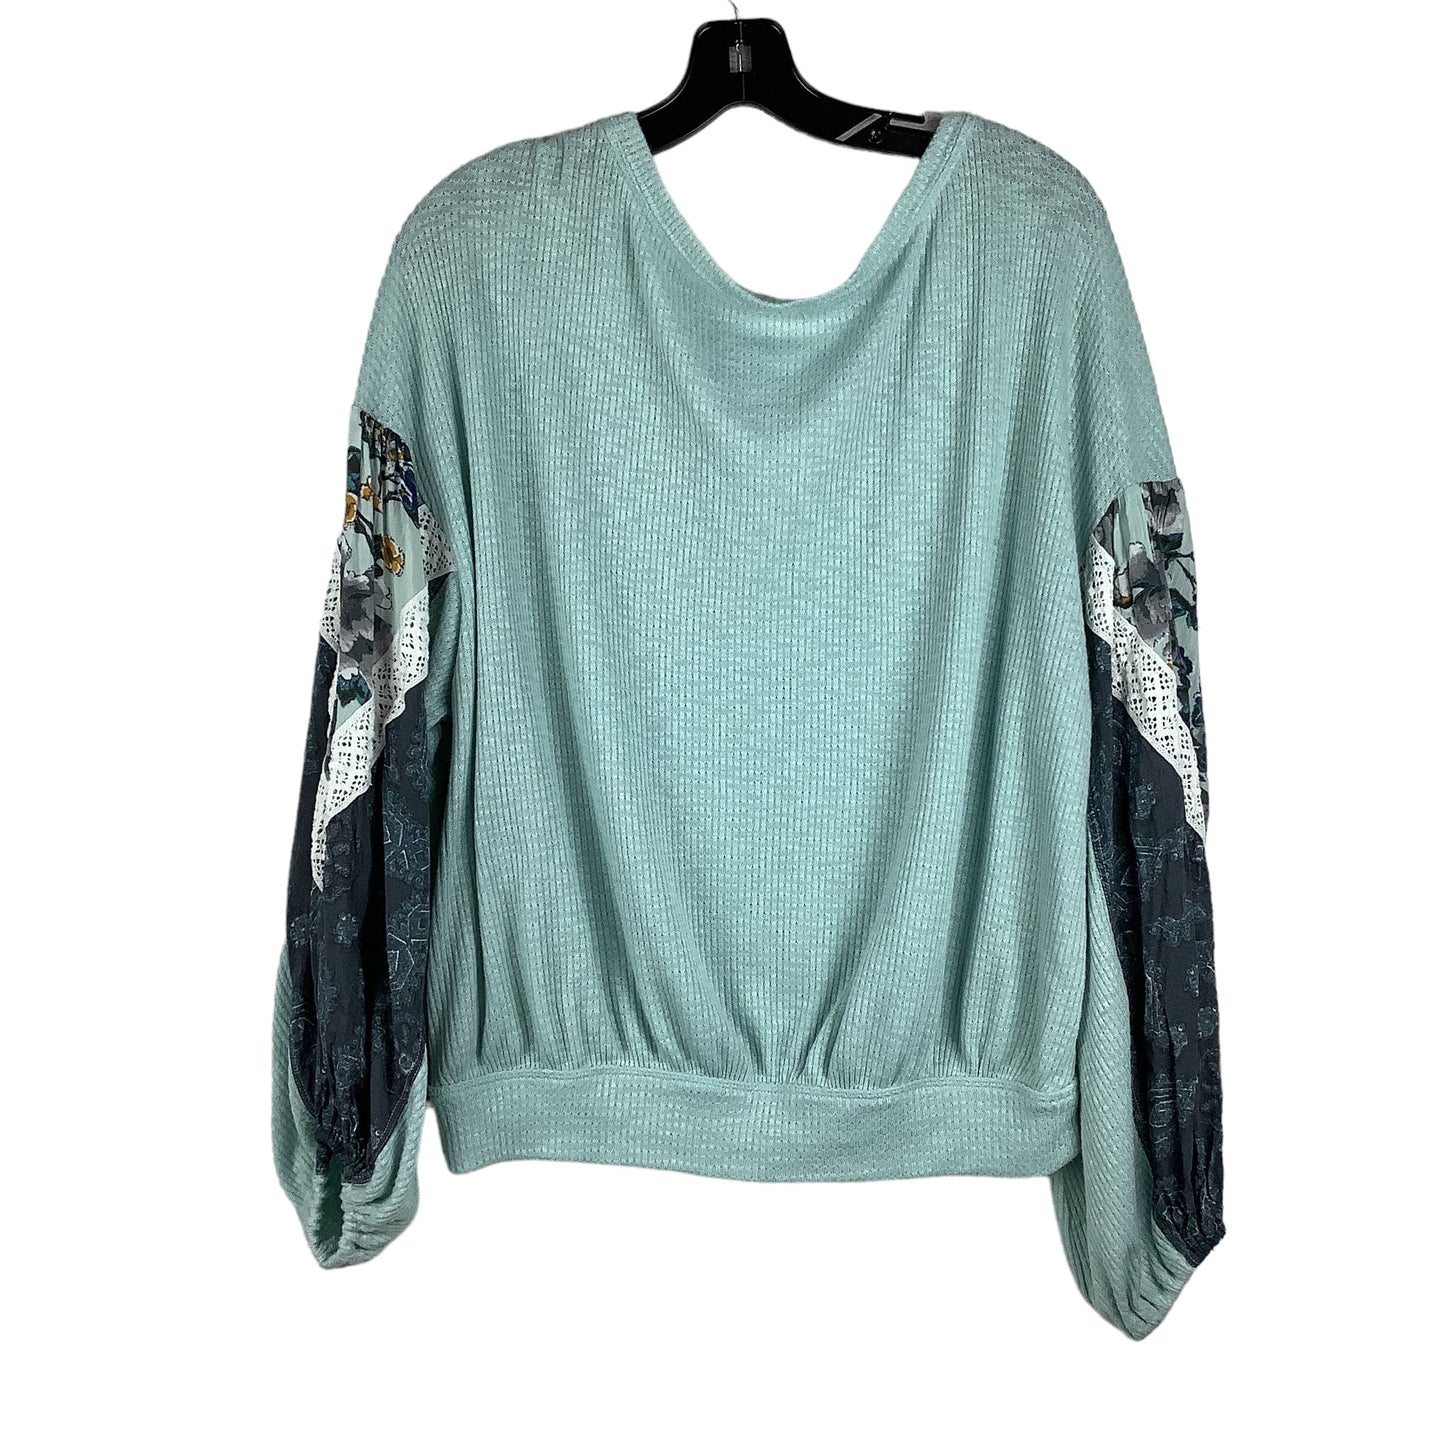 Blue Top Long Sleeve Free People, Size L